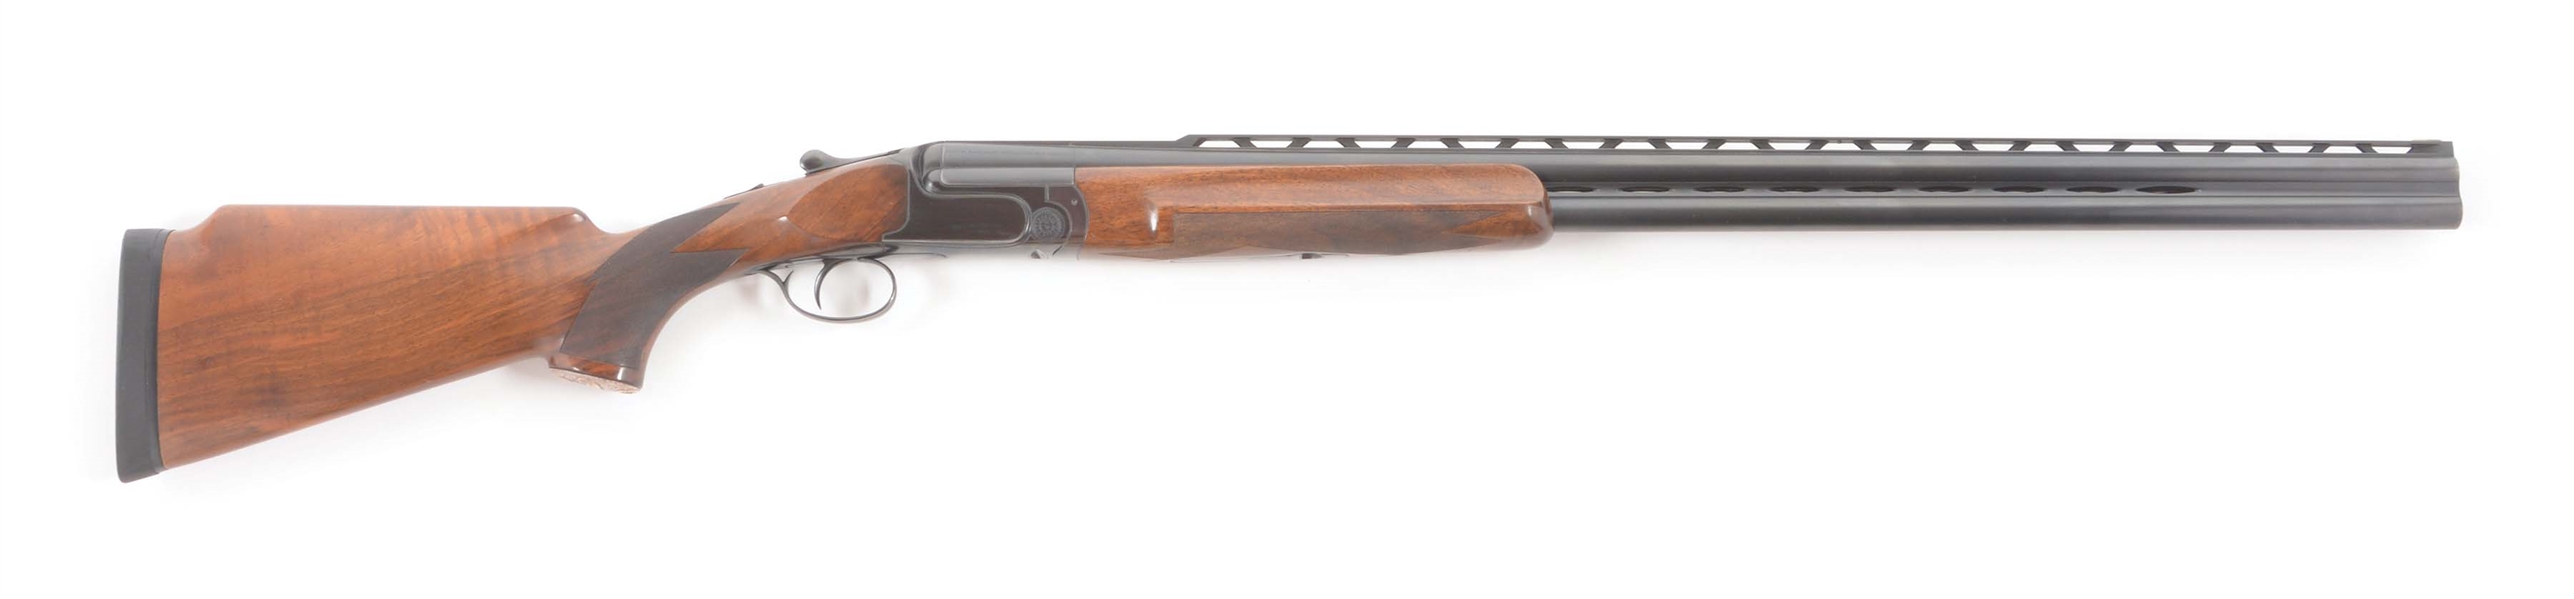 (M) ITHACA IMPORTED MX-8 12 BORE SHOTGUN MADE BY PERAZZI.